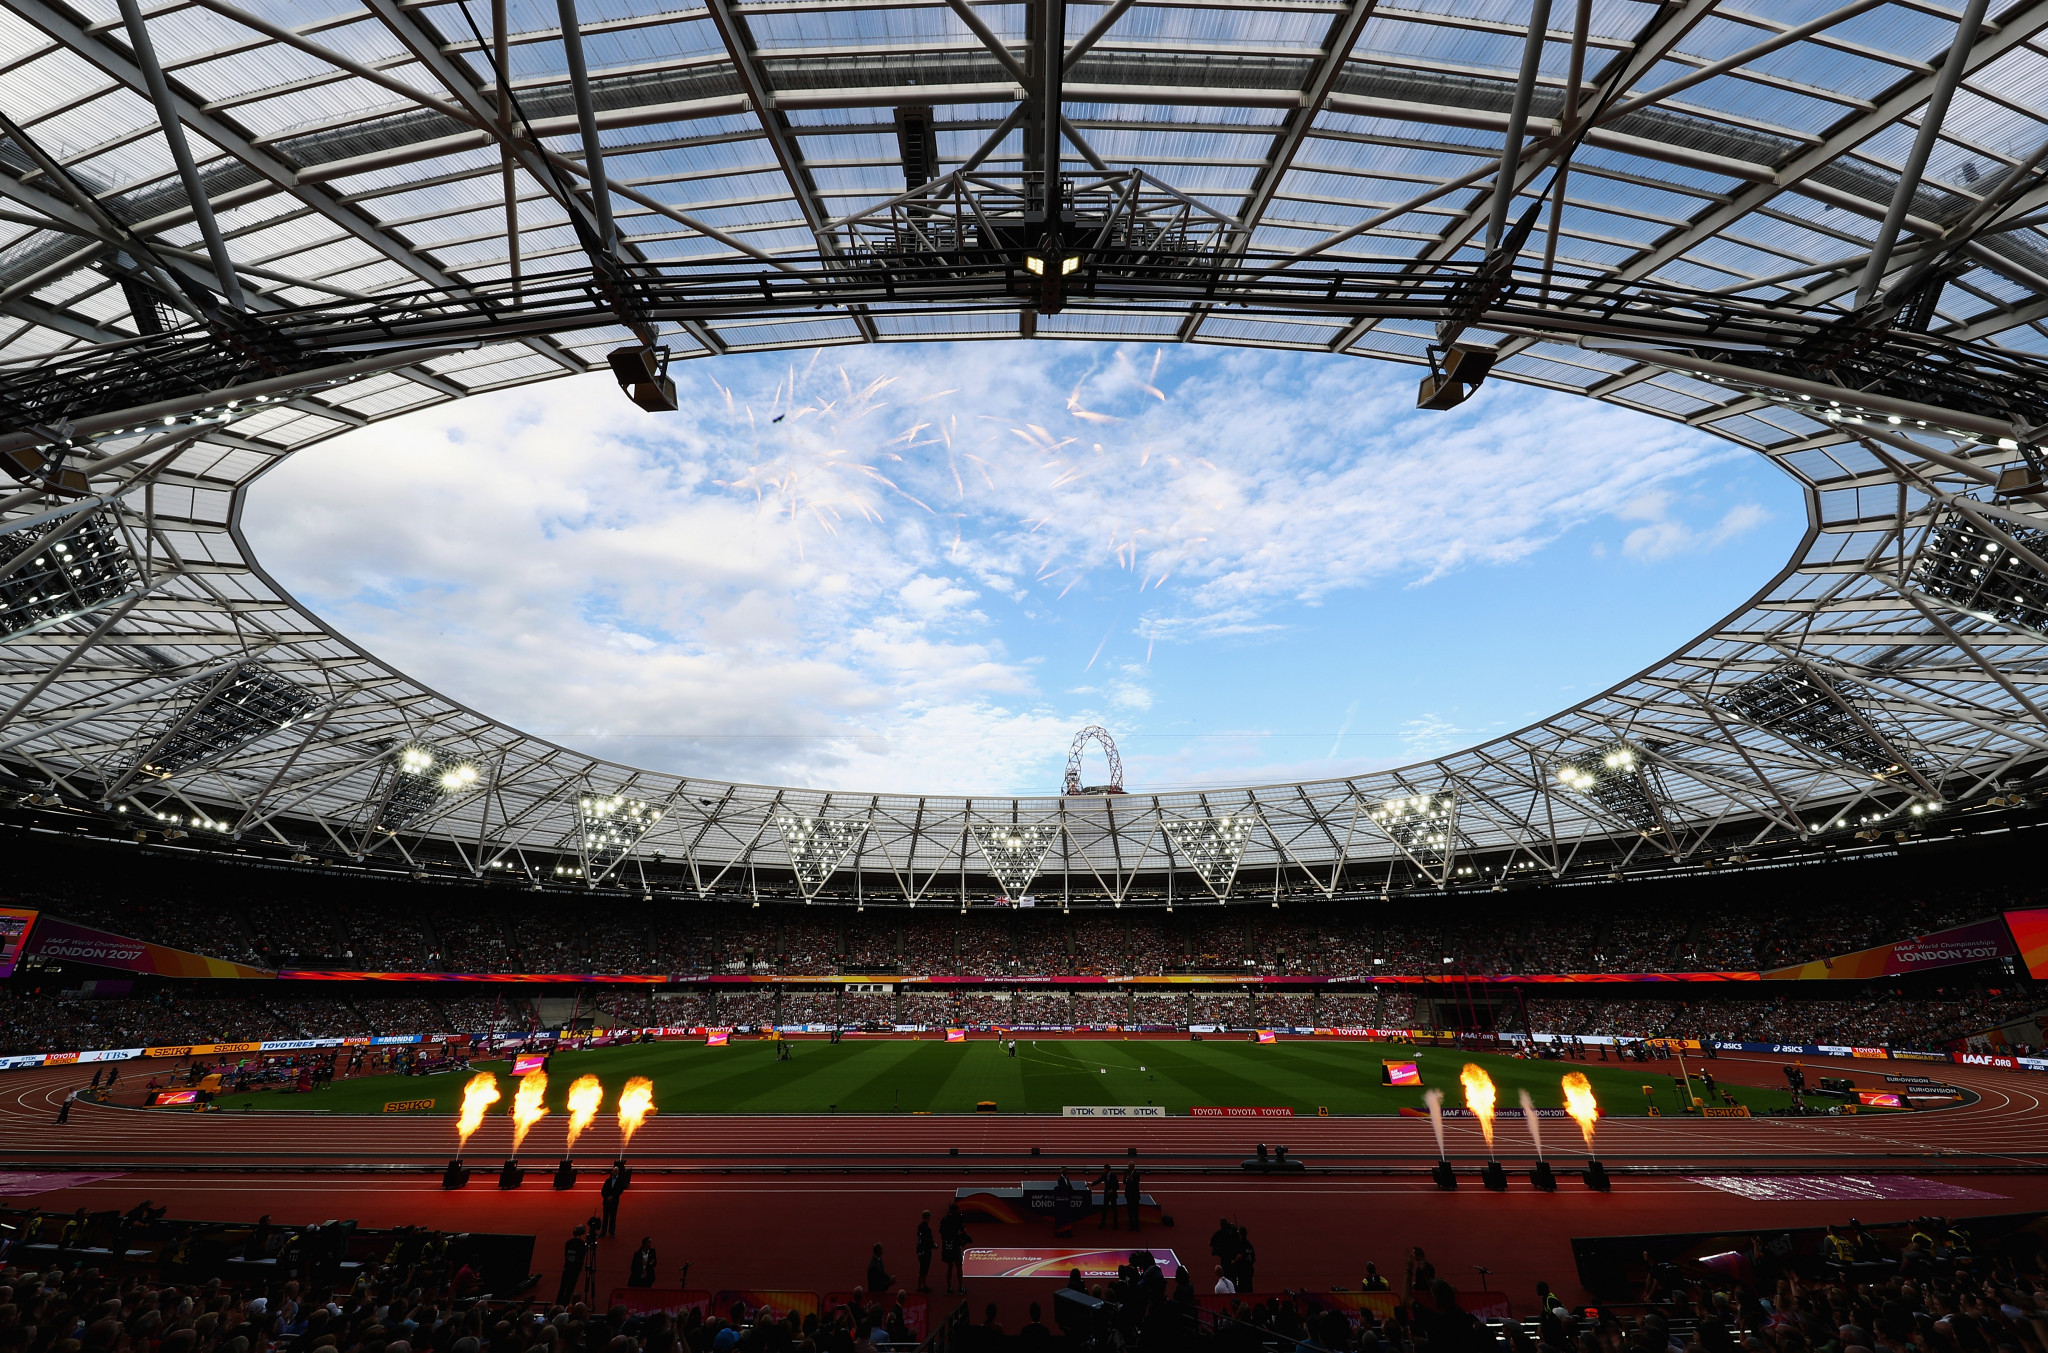 Eight nations ready to contest inaugural Athletics World Cup in London